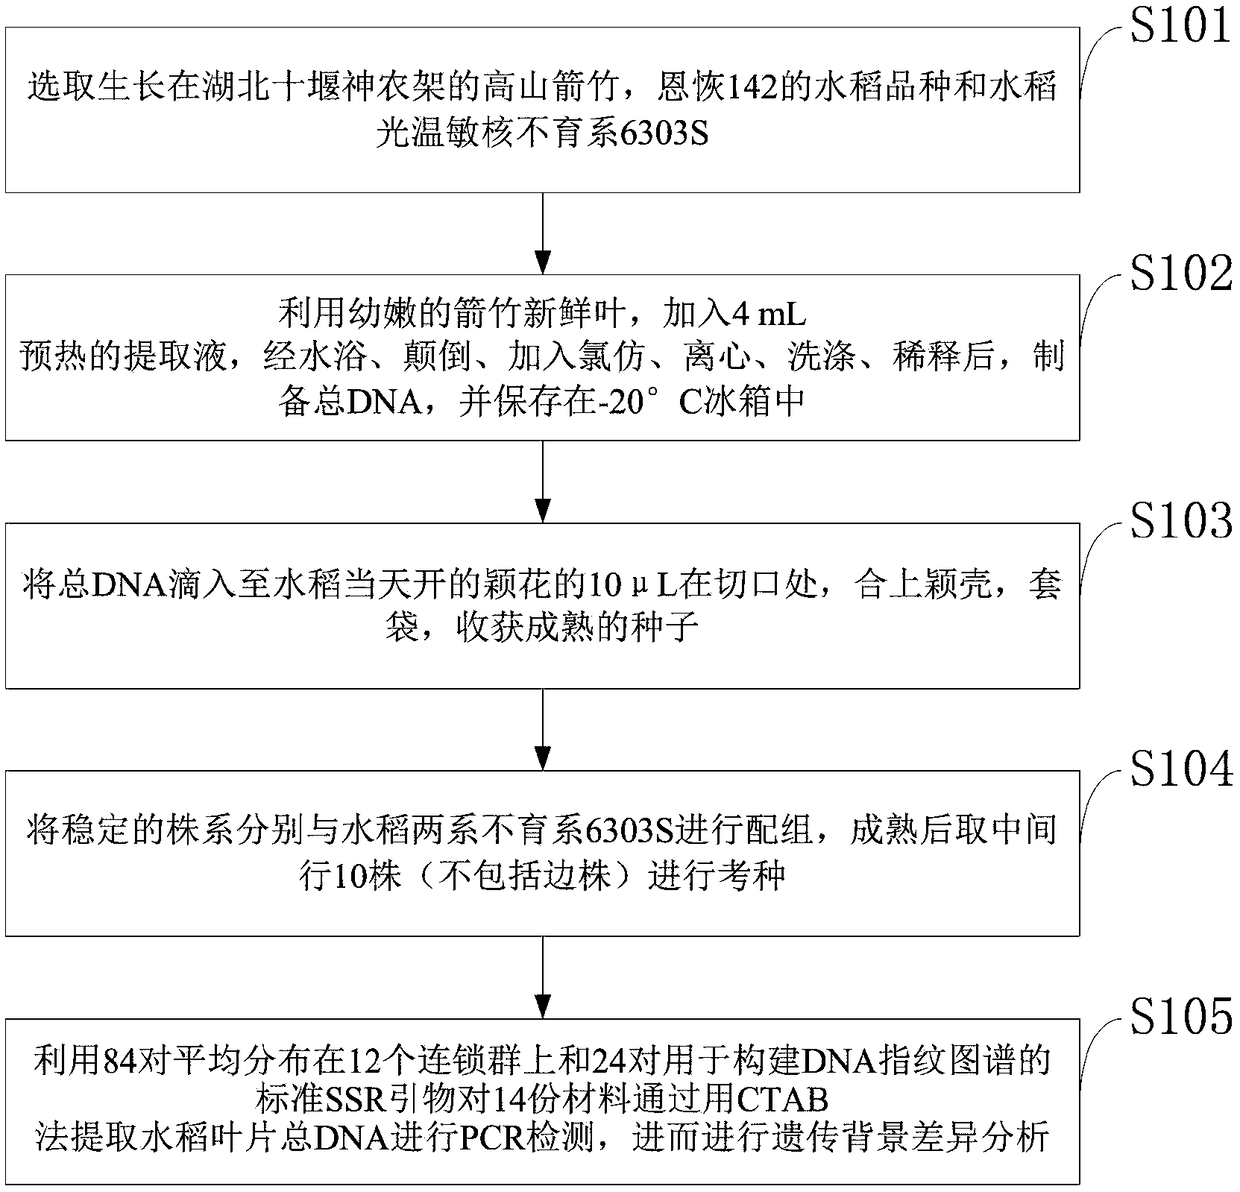 Method for obtaining new rice germplasm through utilizing fargesia DNA (deoxyribonucleic acid) to combine with pollen tube channel